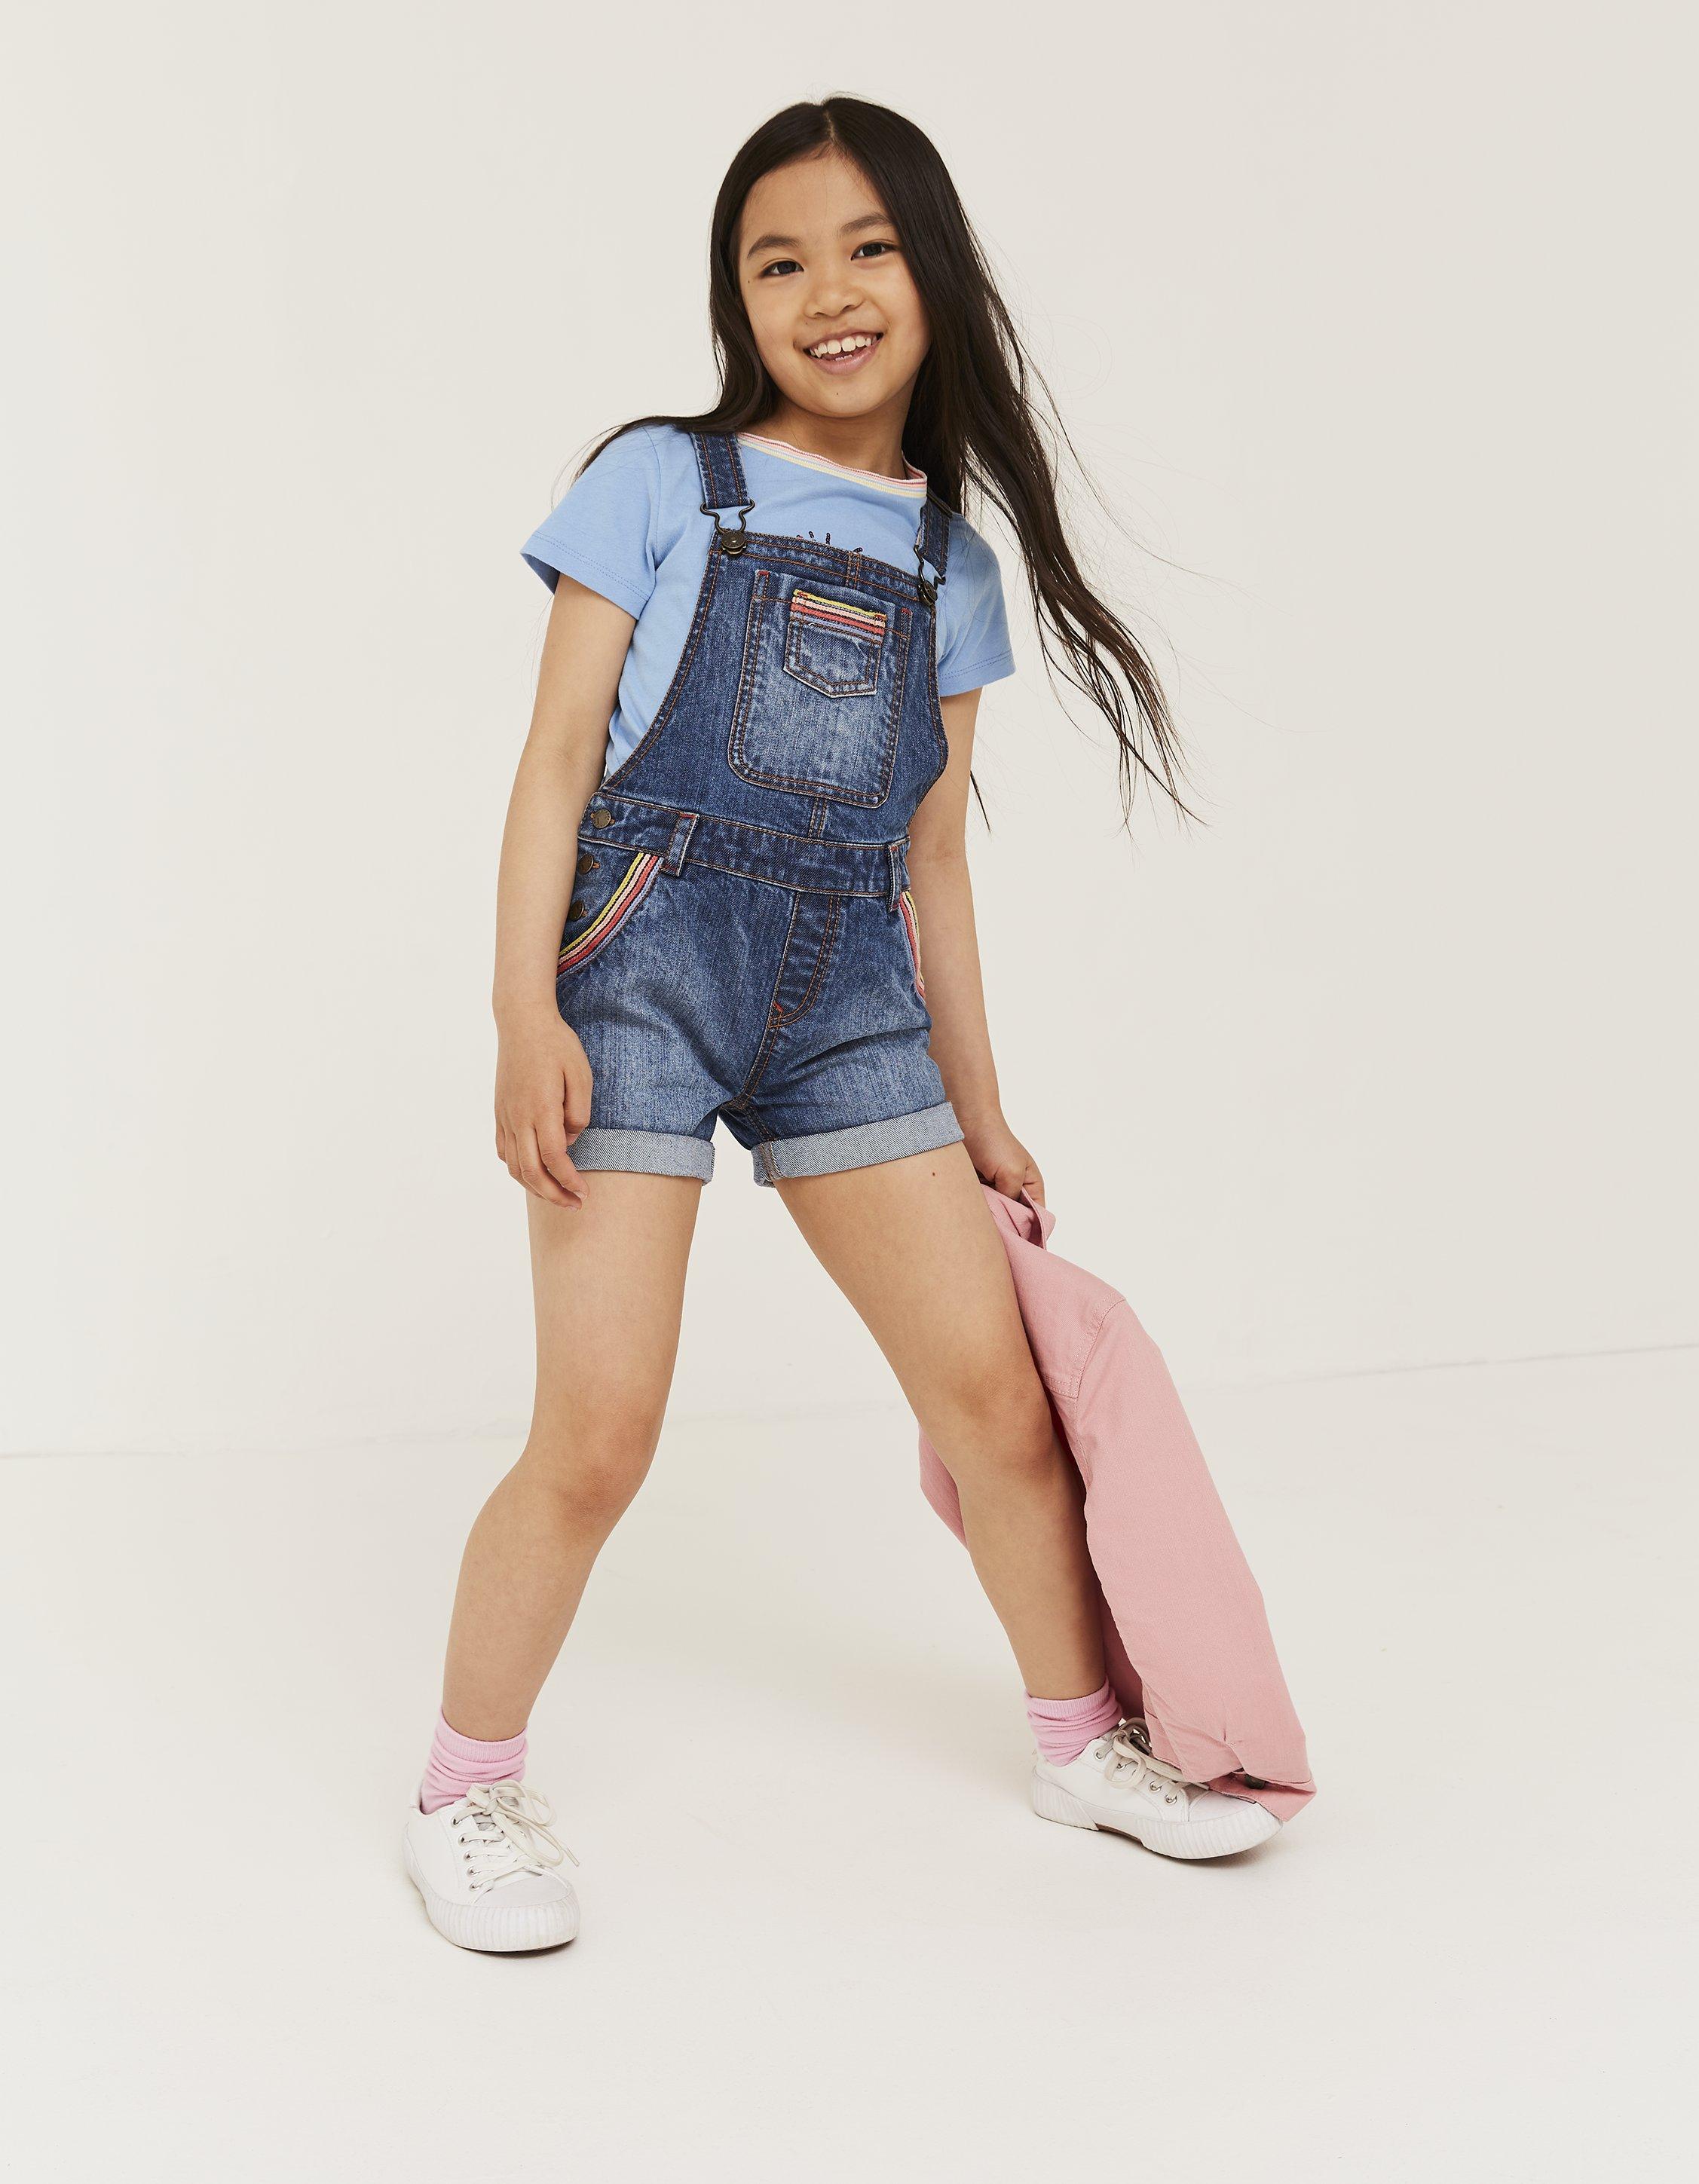 Shortie Dungarees, Shorts